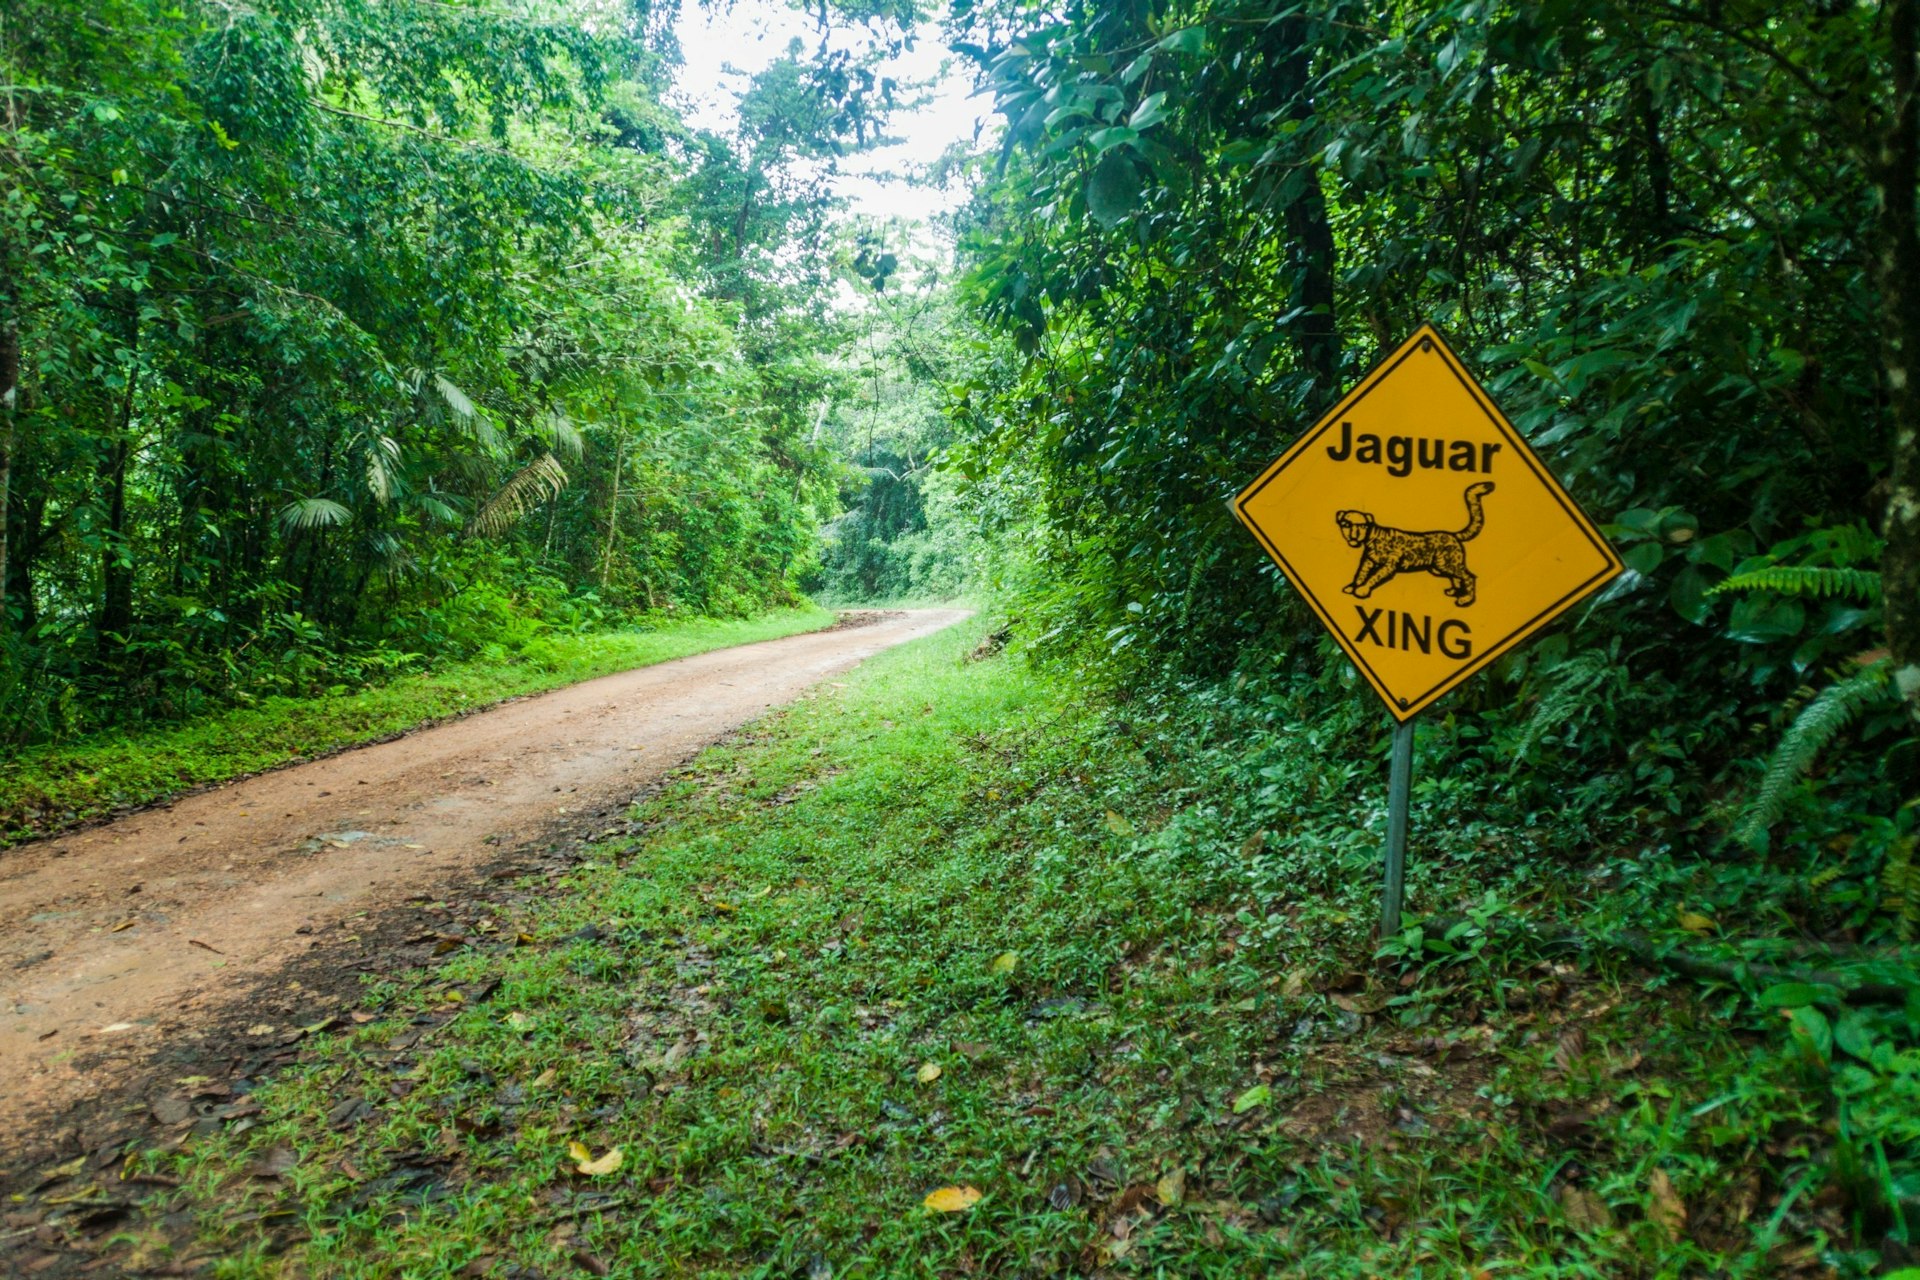 A yellow road sign with the outline of a jaguar on it warns that jaguars may be crossing the road through the jungle